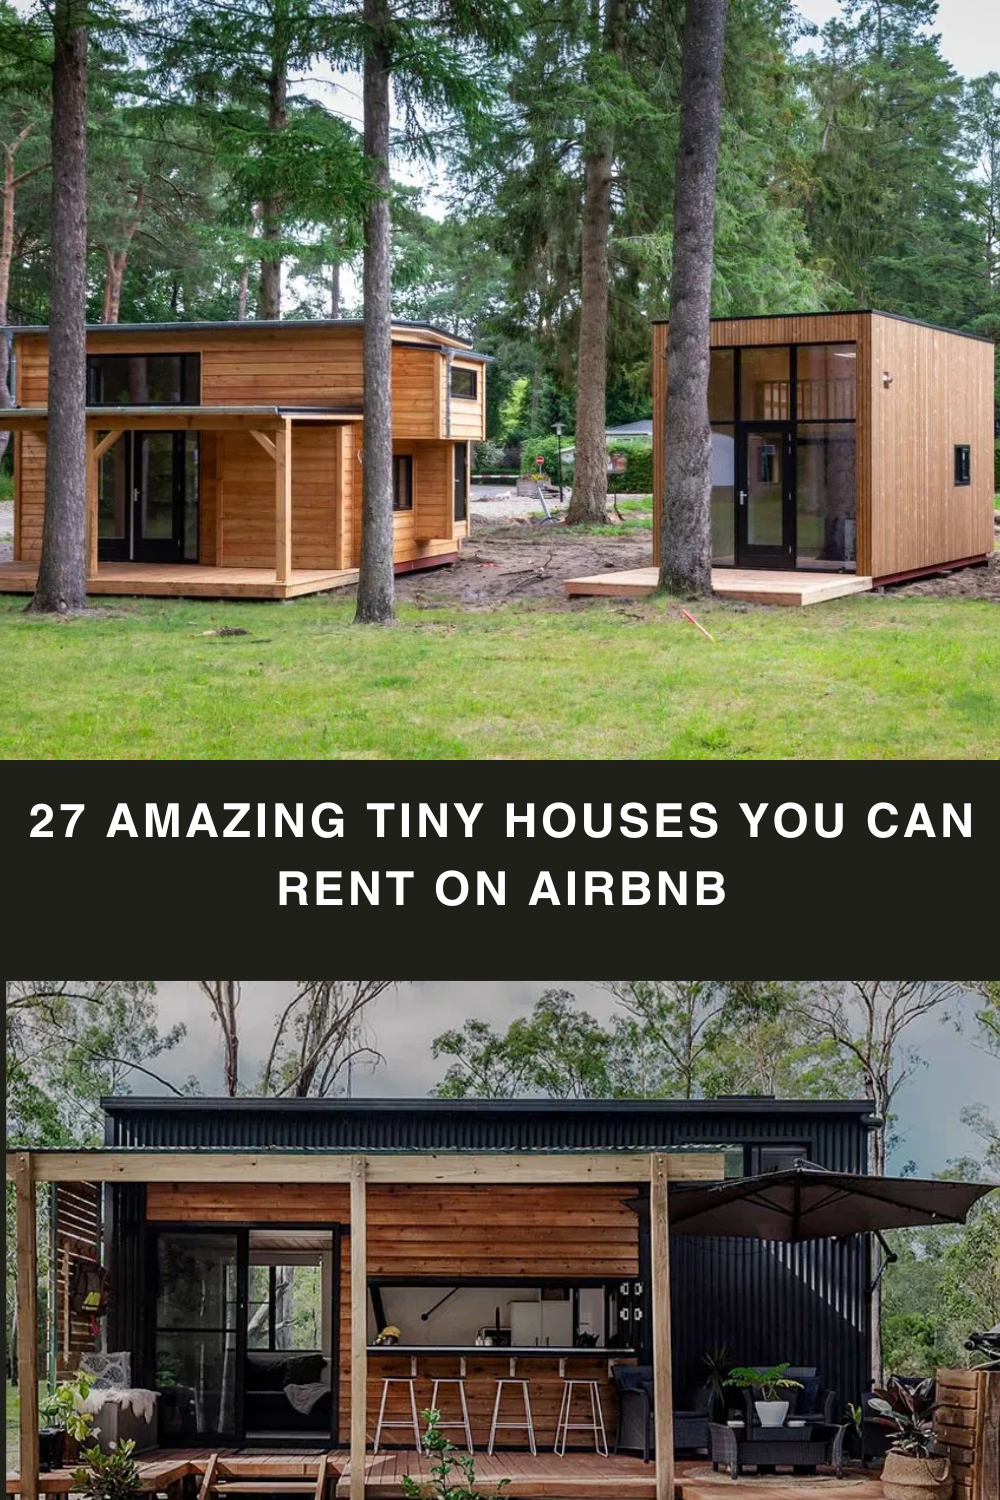 27 Amazing Tiny Houses You Can Rent on Airbnb pin